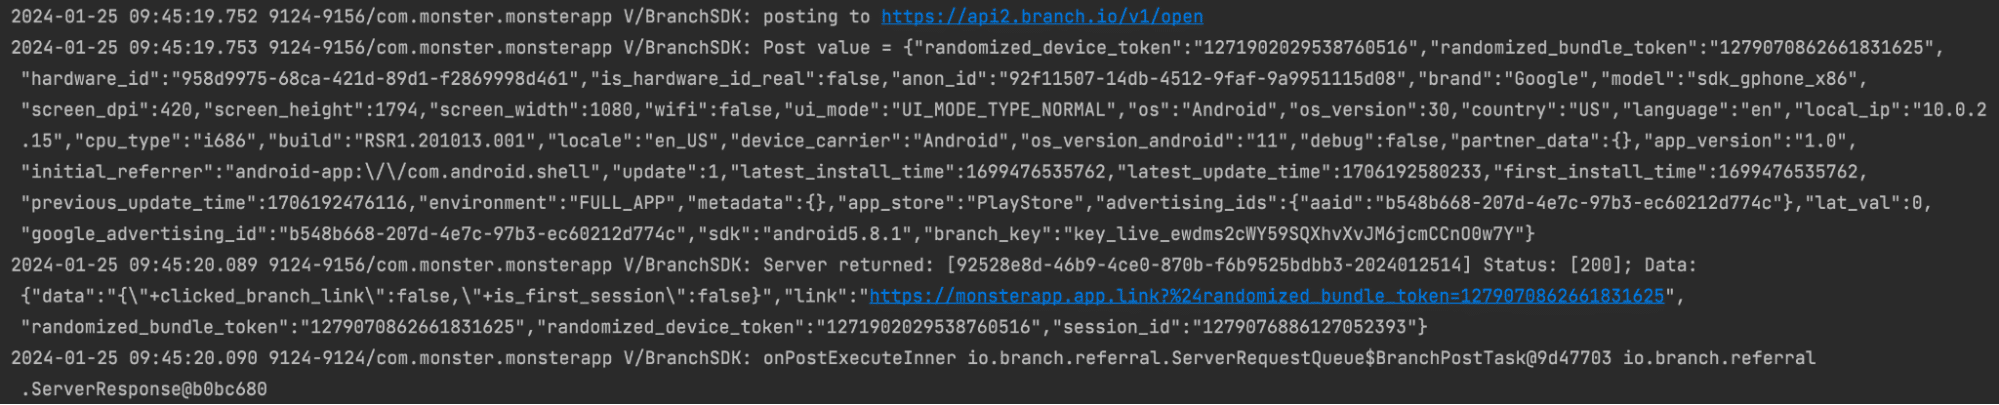 An image of added code in Branch's SDKs.